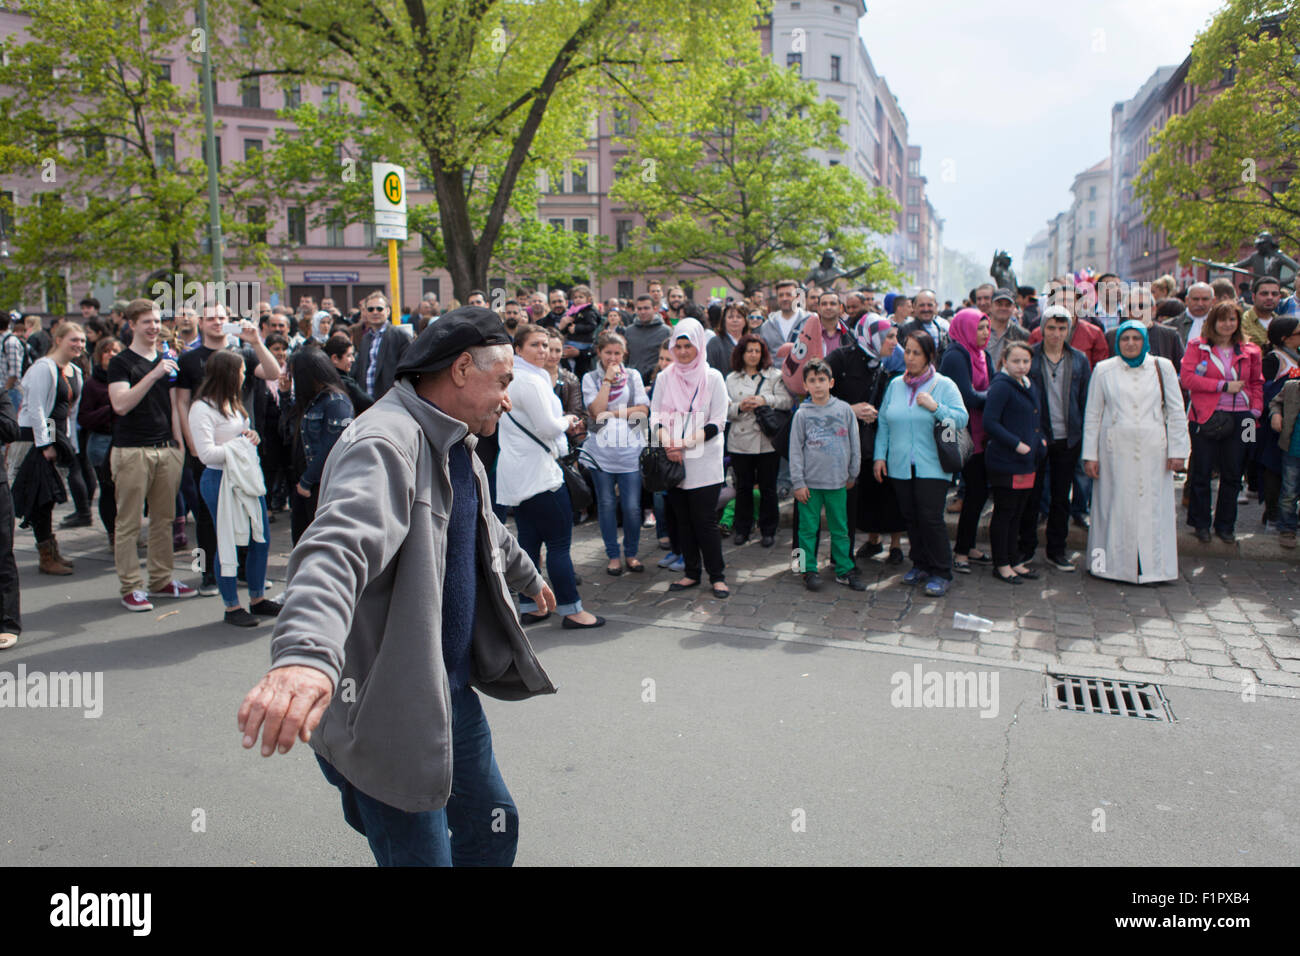 Turkish man dancing in front of people celebrating may day at the first of May in Kreuzberg Berlin Stock Photo